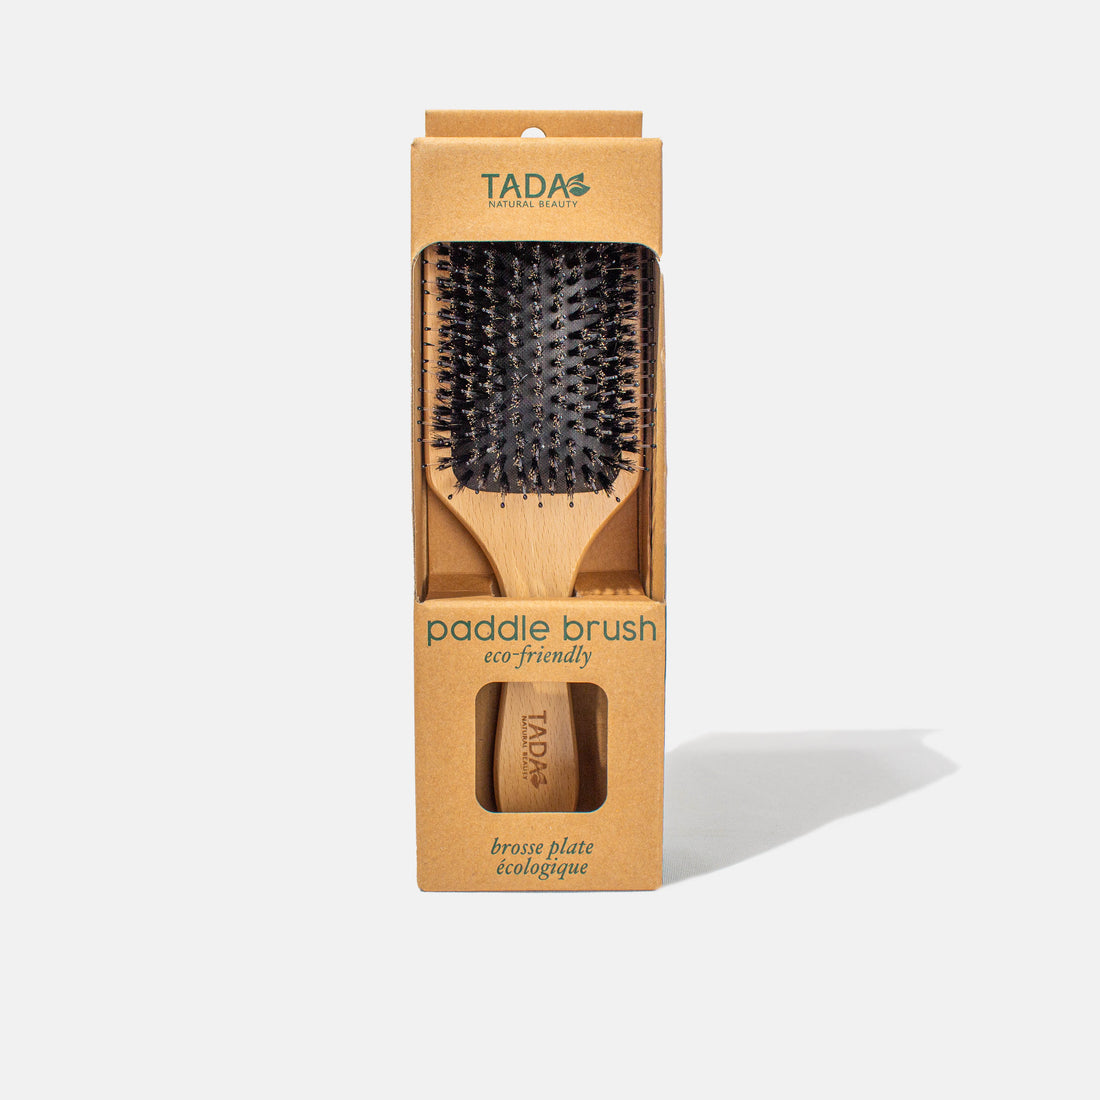 Bass Brushes Shine & Condition Hair Brush Premium Bamboo Handle With  Premium 100% Pure Firm Natural Boar Bristles Large Paddle Striped Bamboo :  Target